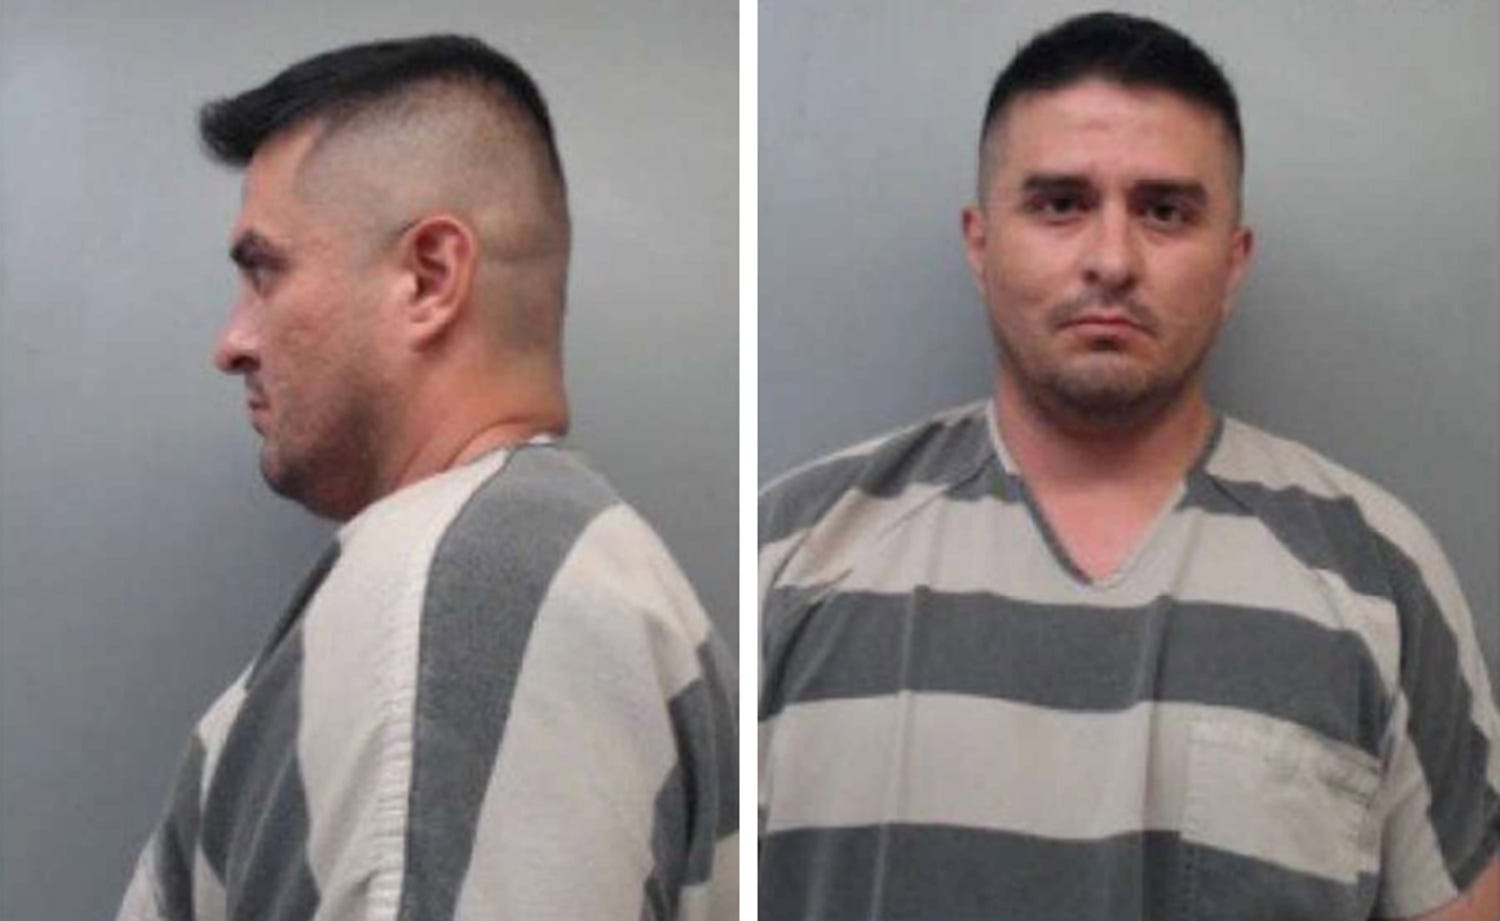 Border Patrol Forced Sex - Murder trial of a Border Patrol agent rekindles questions over agency